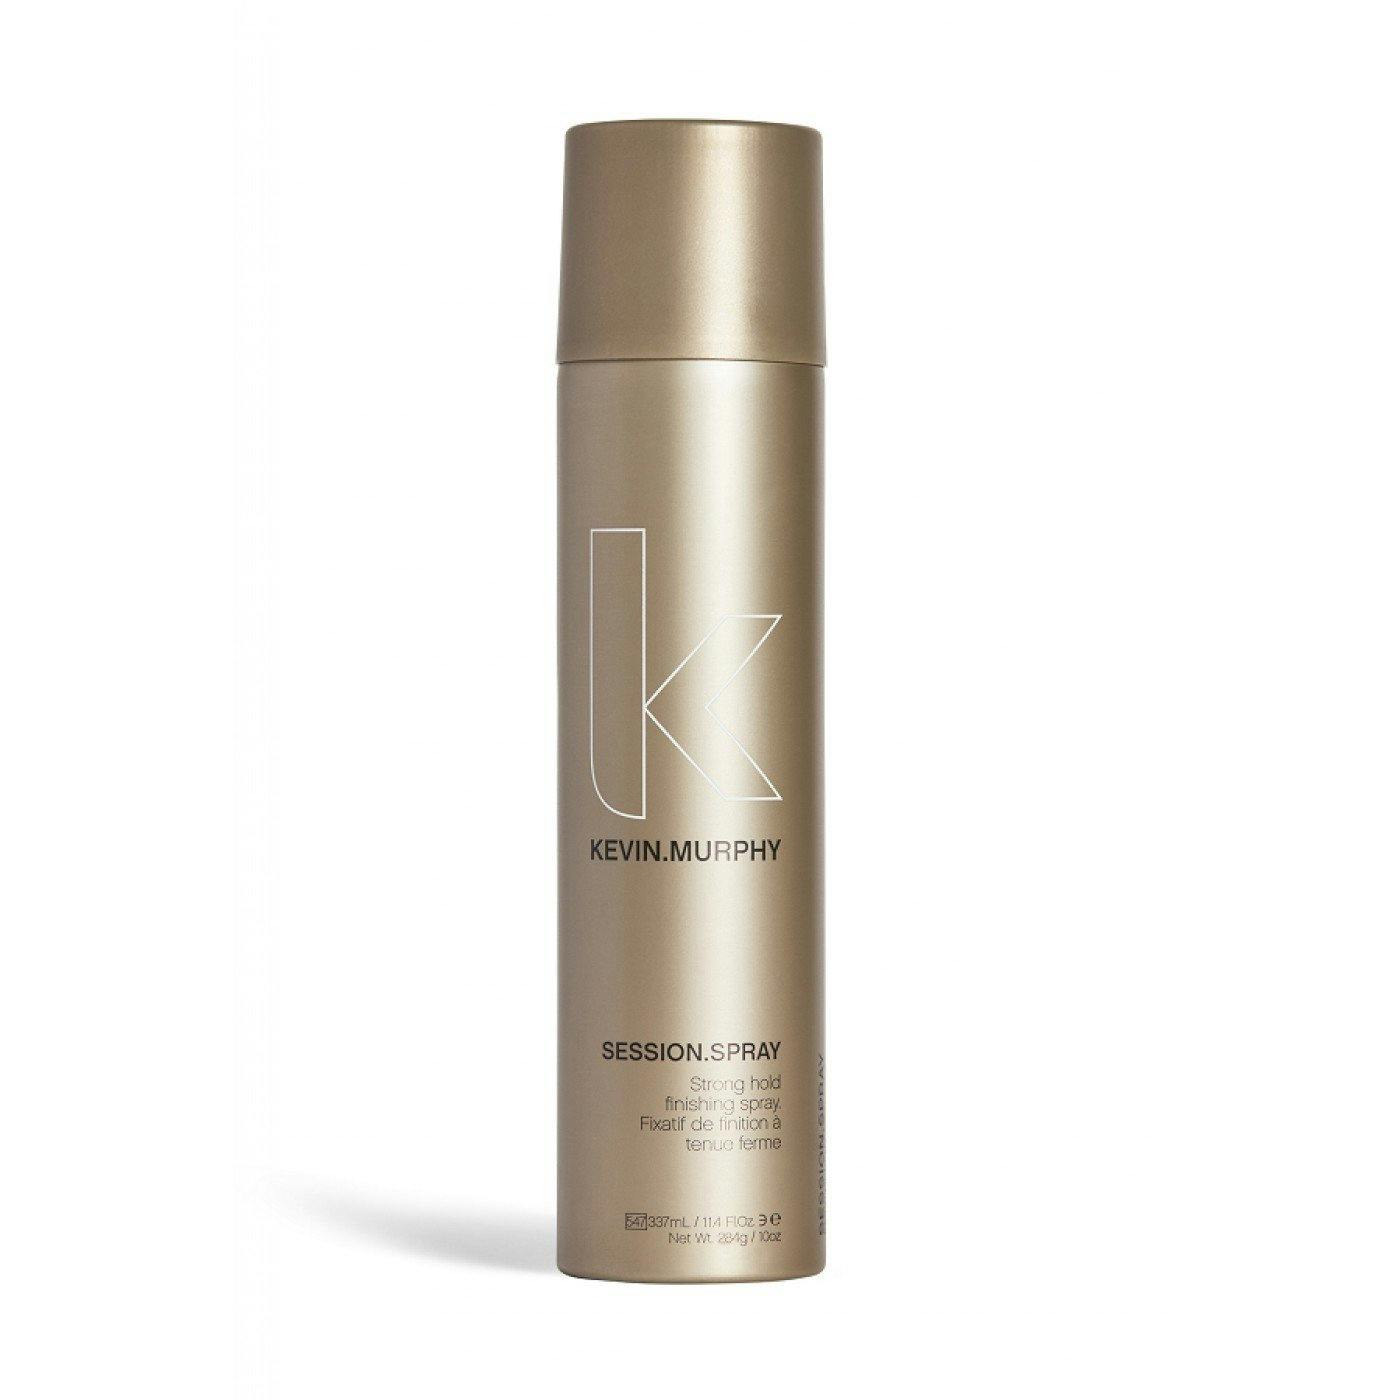 KEVIN.MURPHY Session.Spray 400ml